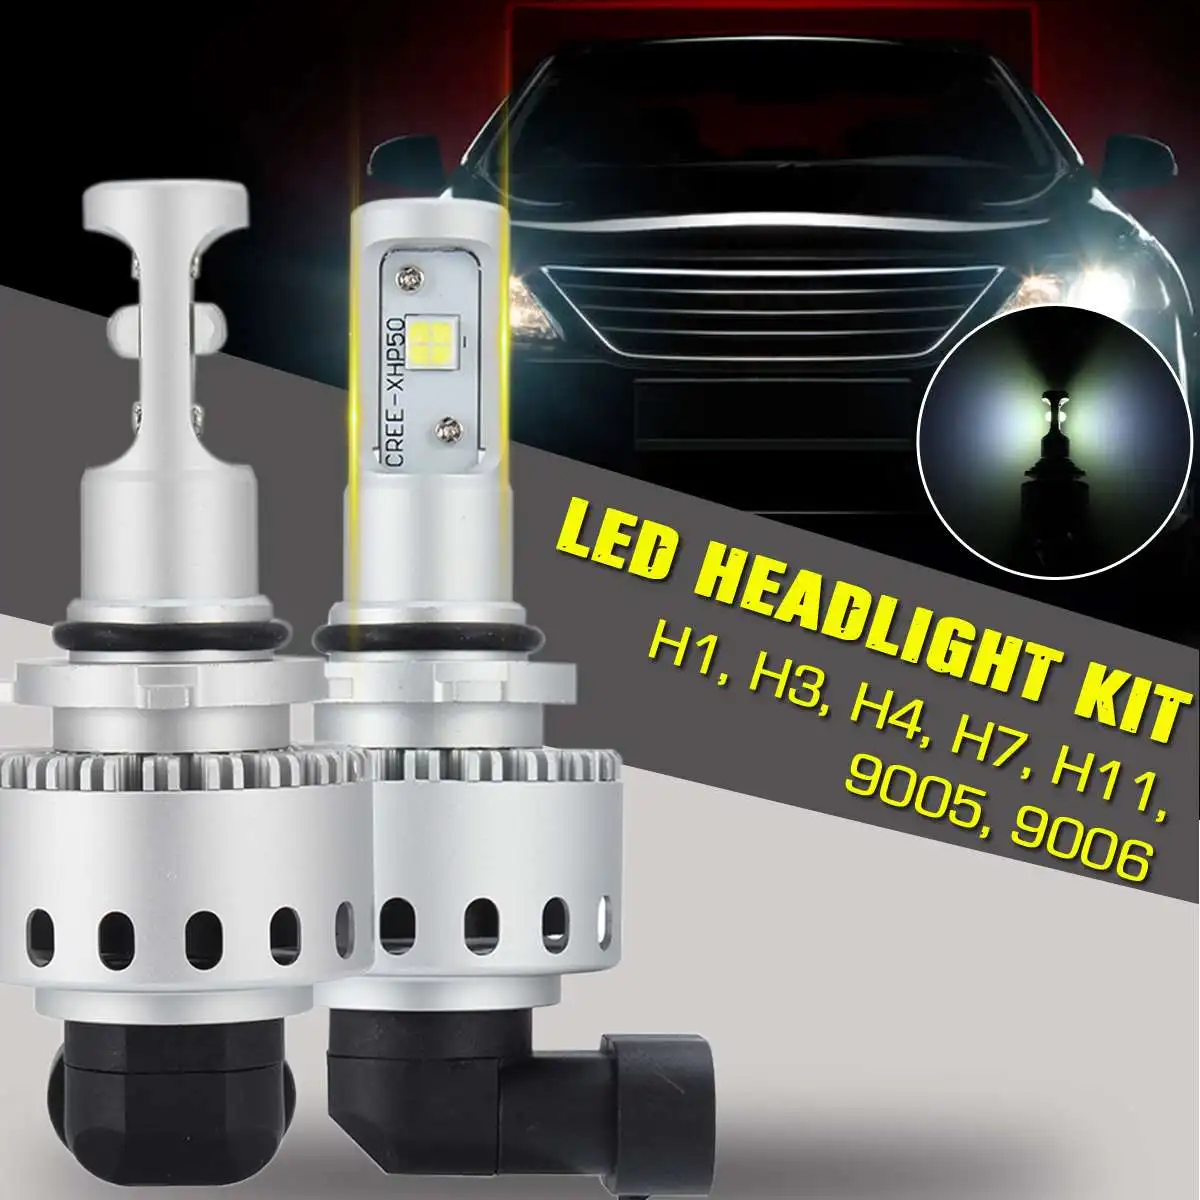 

AutoLeader 7S Car Headlight Automobiles LED Bulb XHP-50 40W 8000LM H1 H4 H7 H11 9005 9006 Car Styling 8000LM 50000hrs DC12-24V